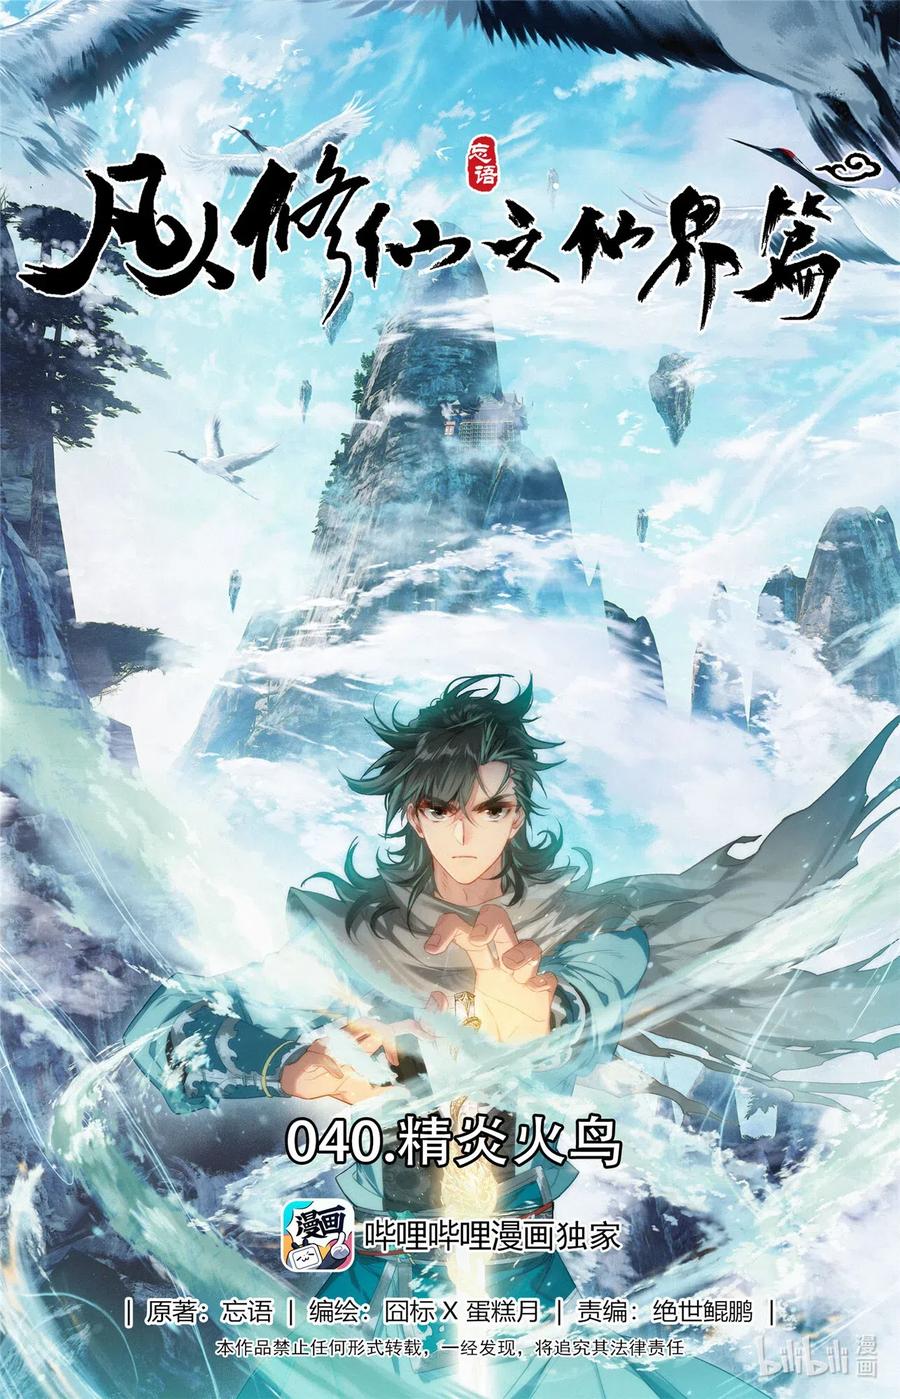 Mortal Cultivation Fairy World Chapter 40